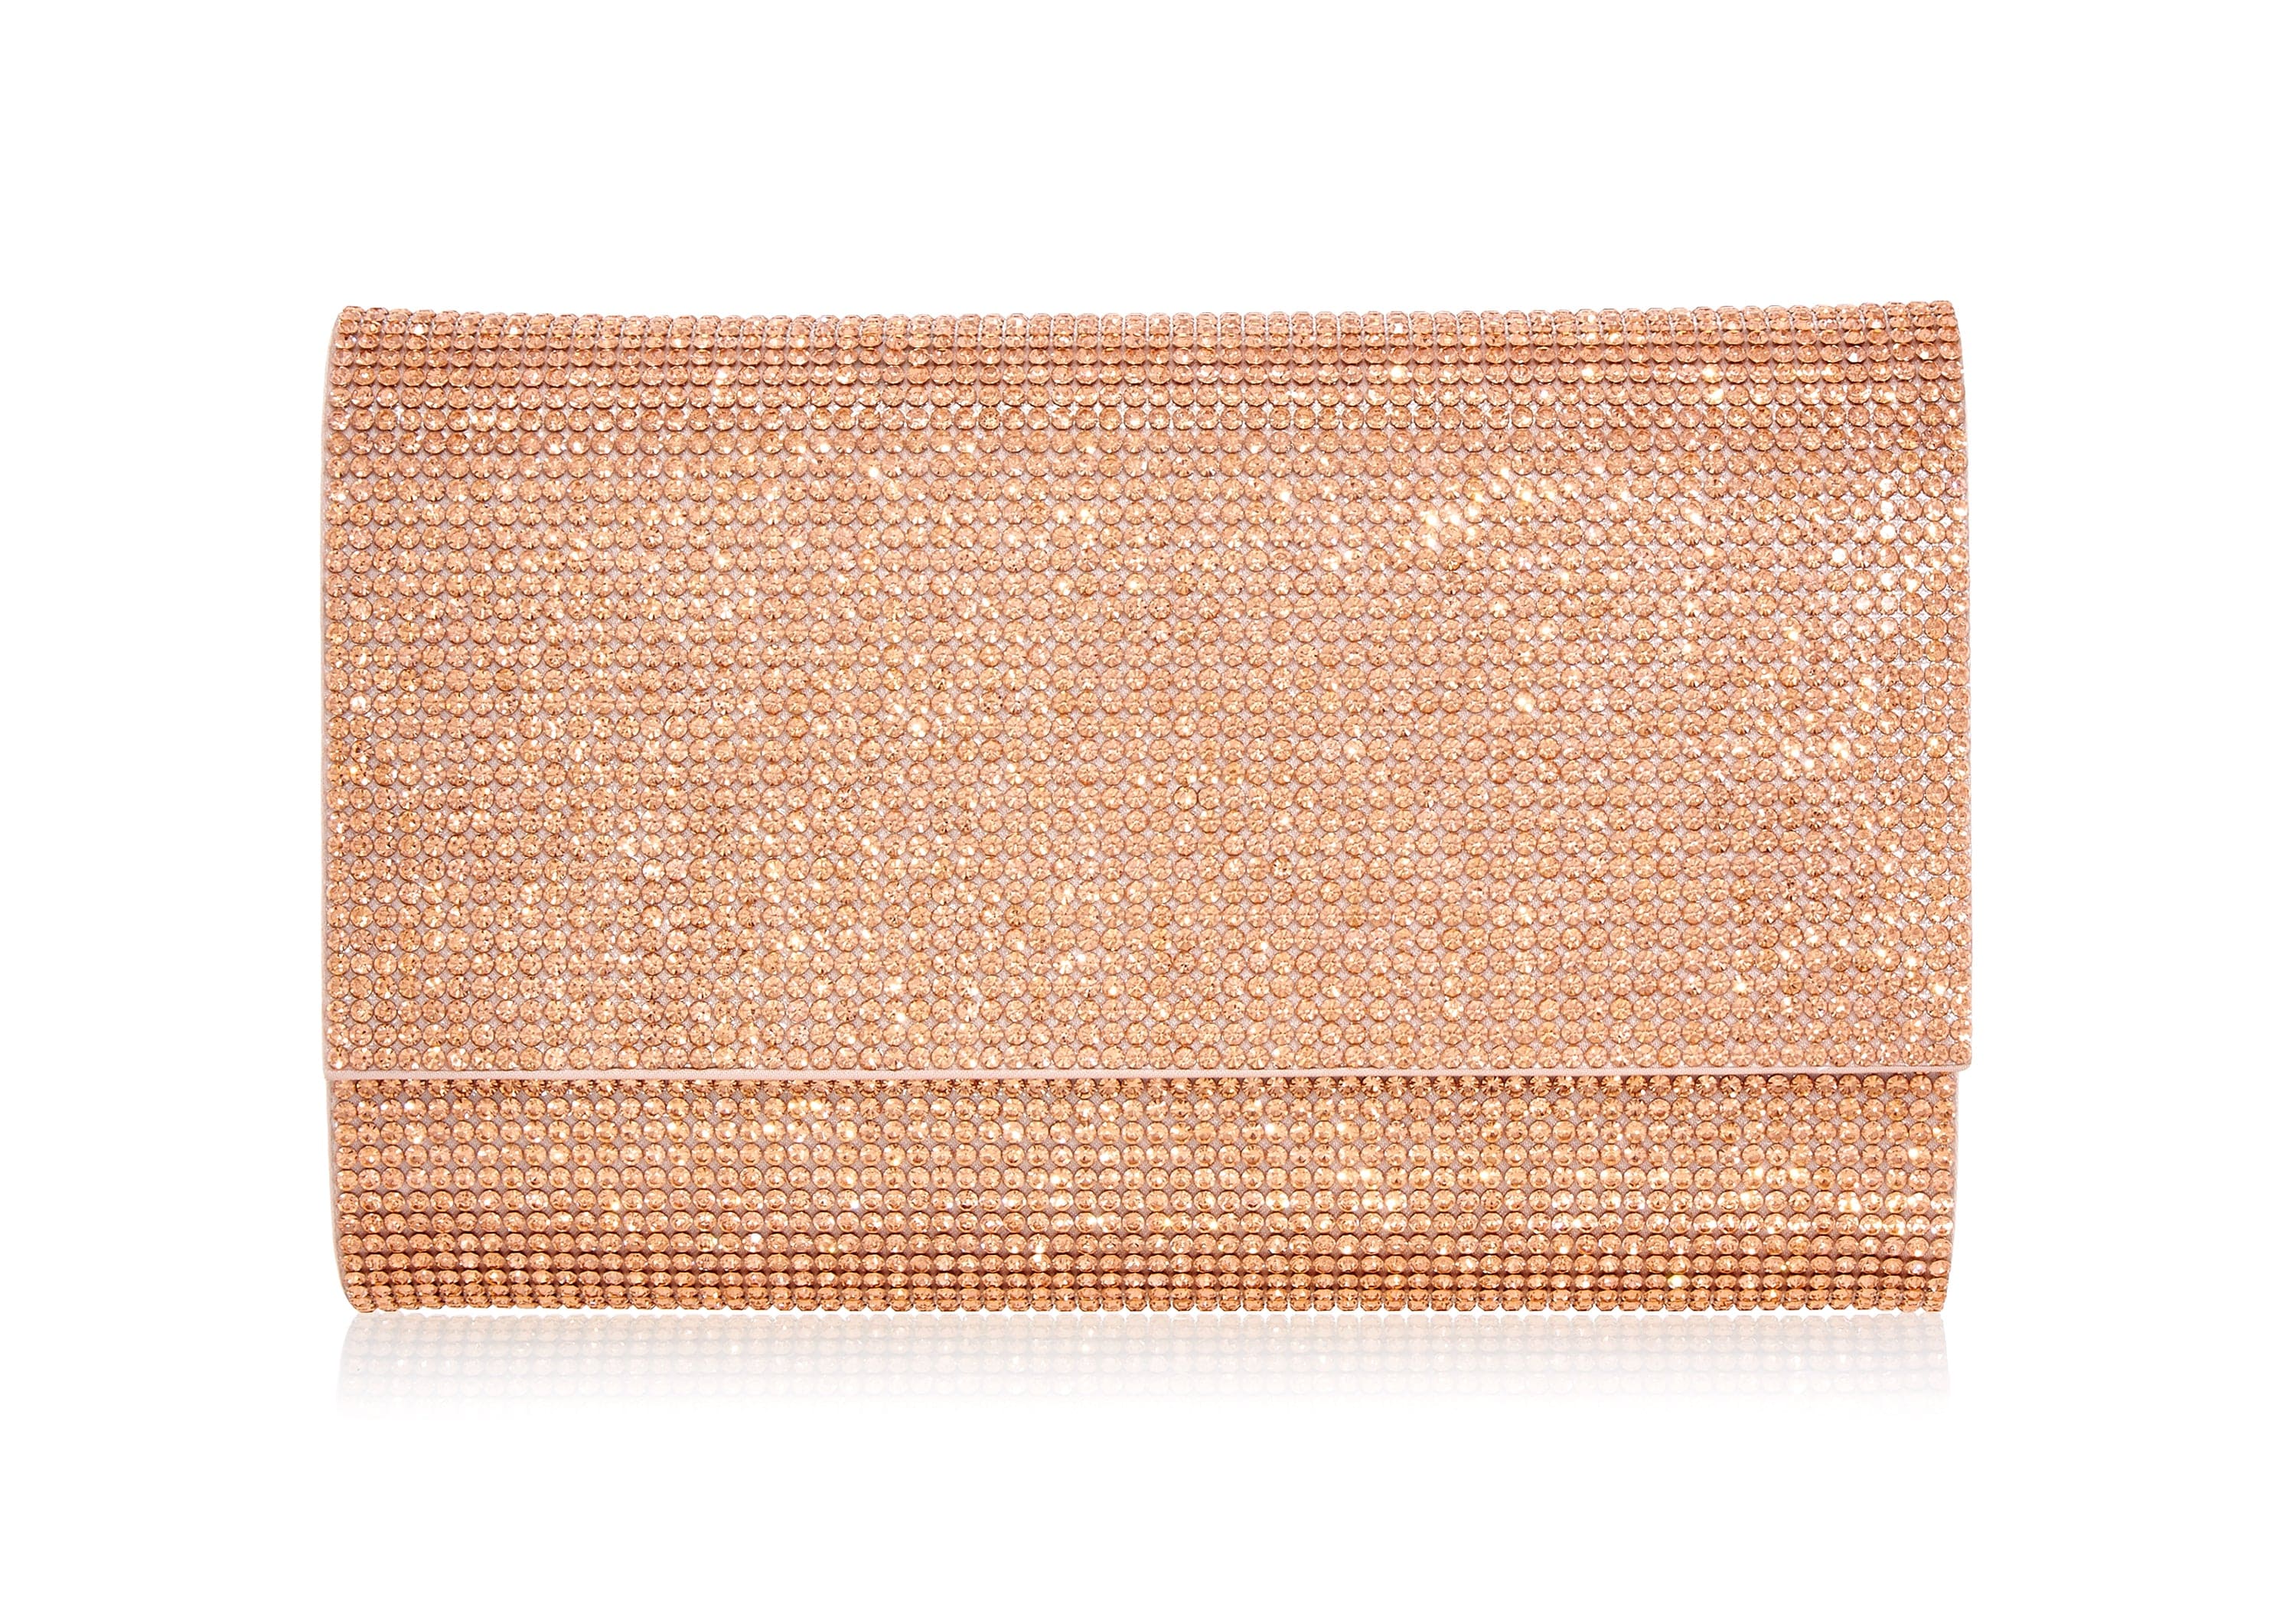 Judith Leiber Couture Women's Rose Crystal Clutch